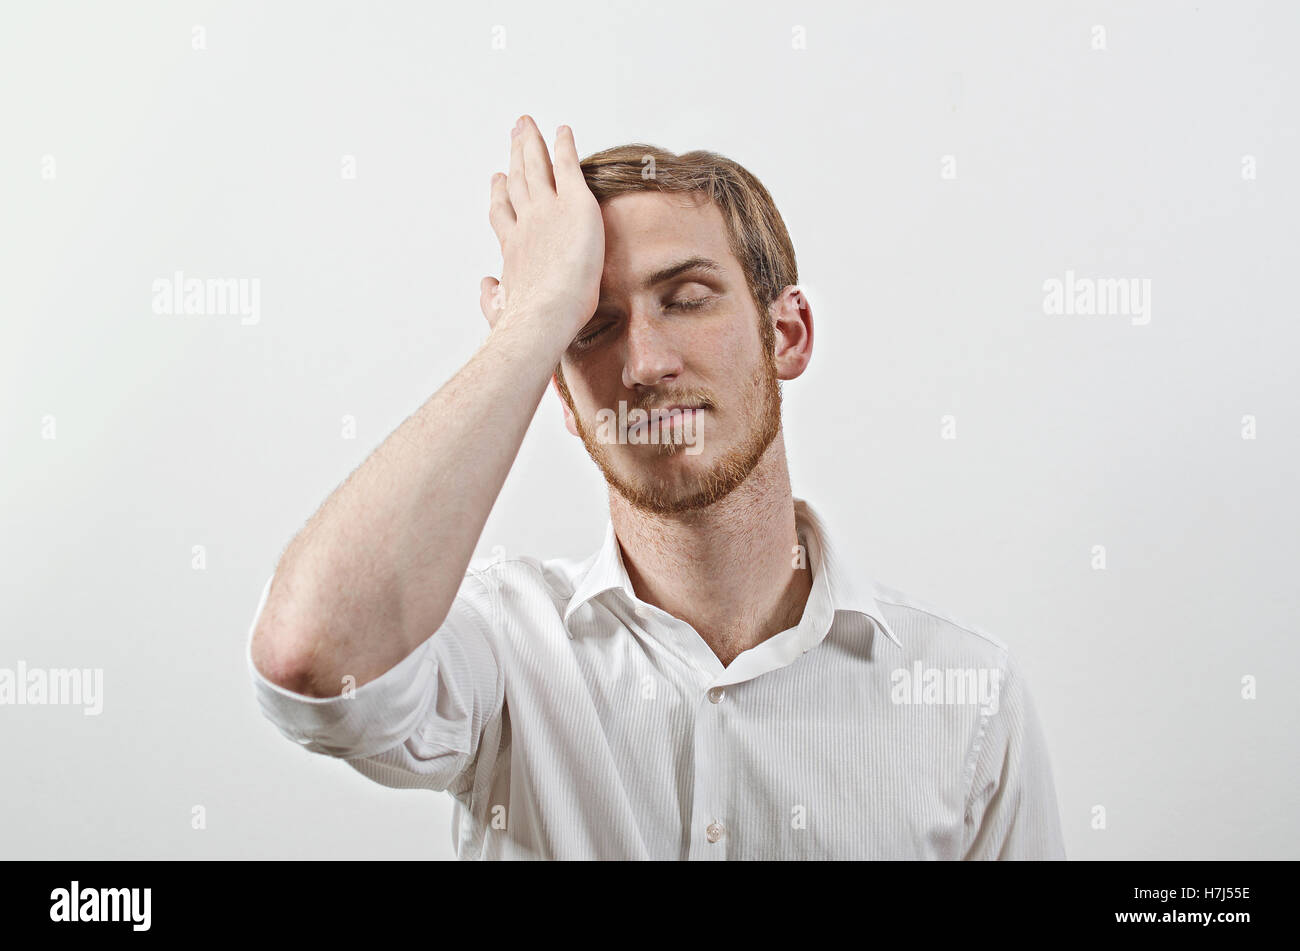 Young Adult Male Wearing White Shirt Gesturing He Has Made a Big Mistake Stock Photo